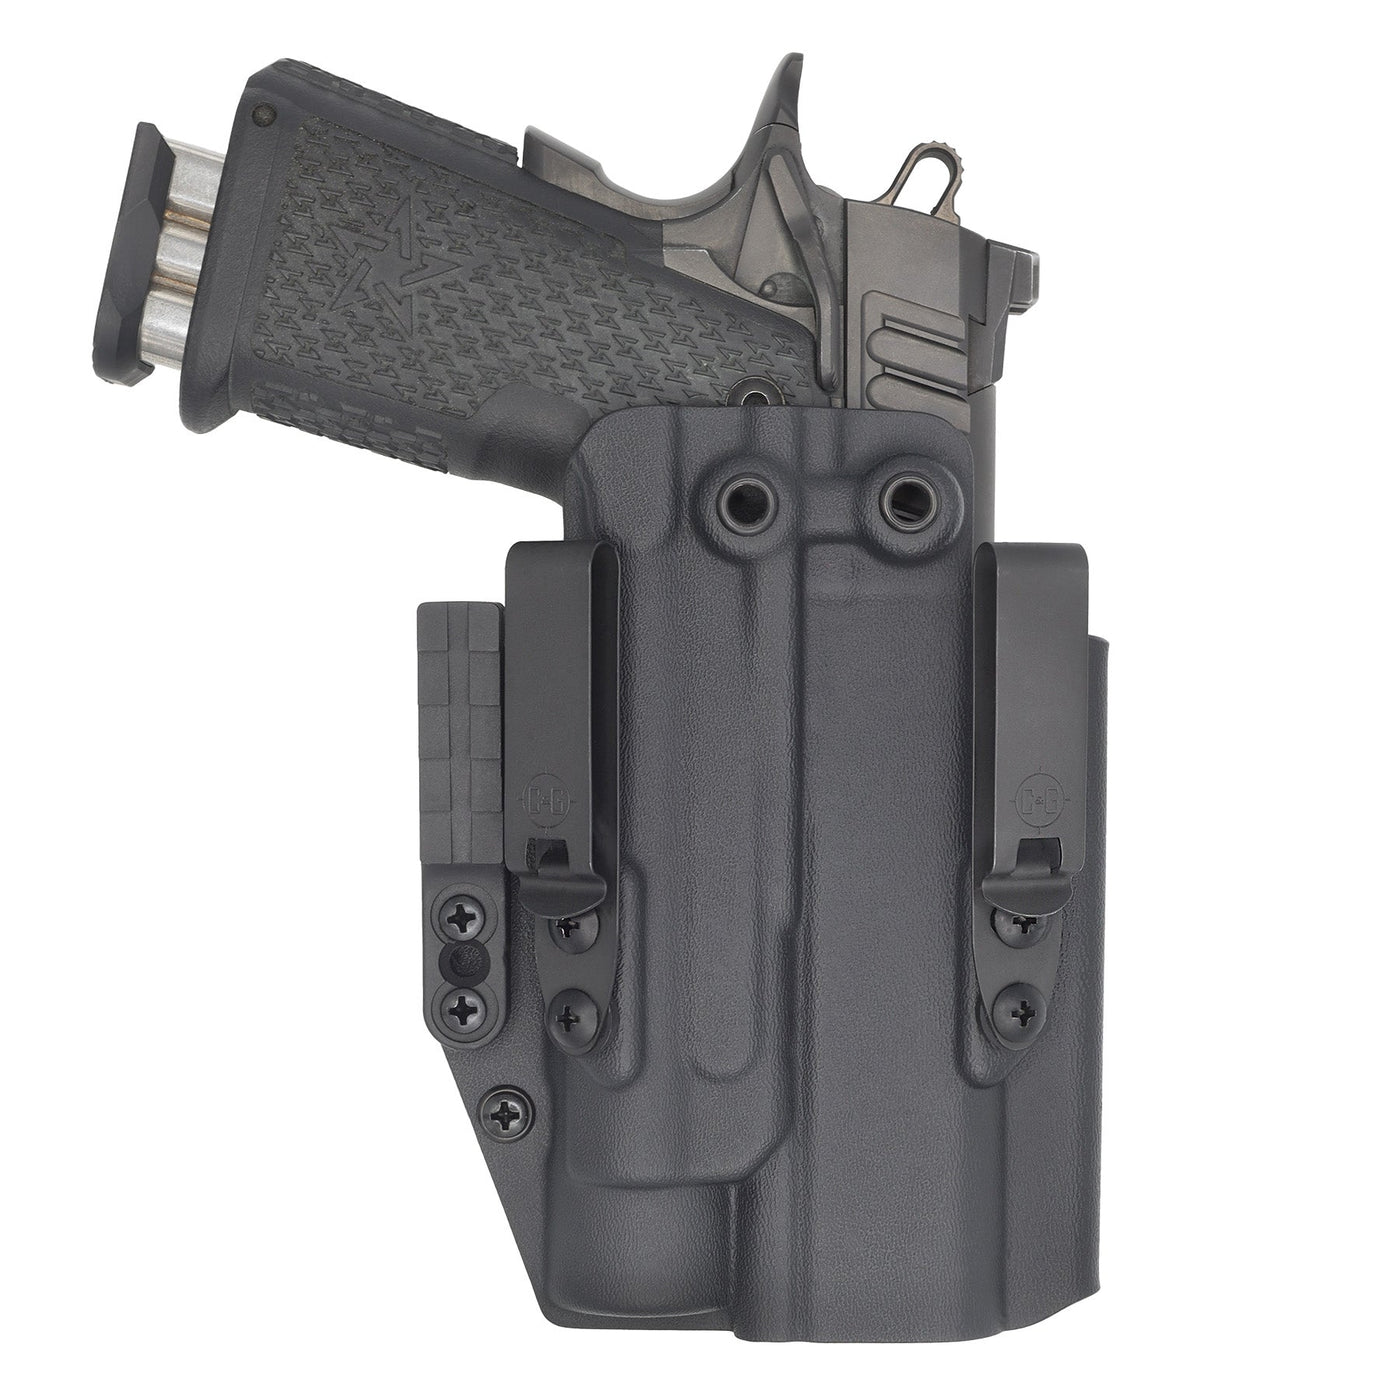 C&G holsters Quickship IWB ALPHA UPGRADE tactical 1911 DS Prodigy Streamlight TLR-1 in holstered position